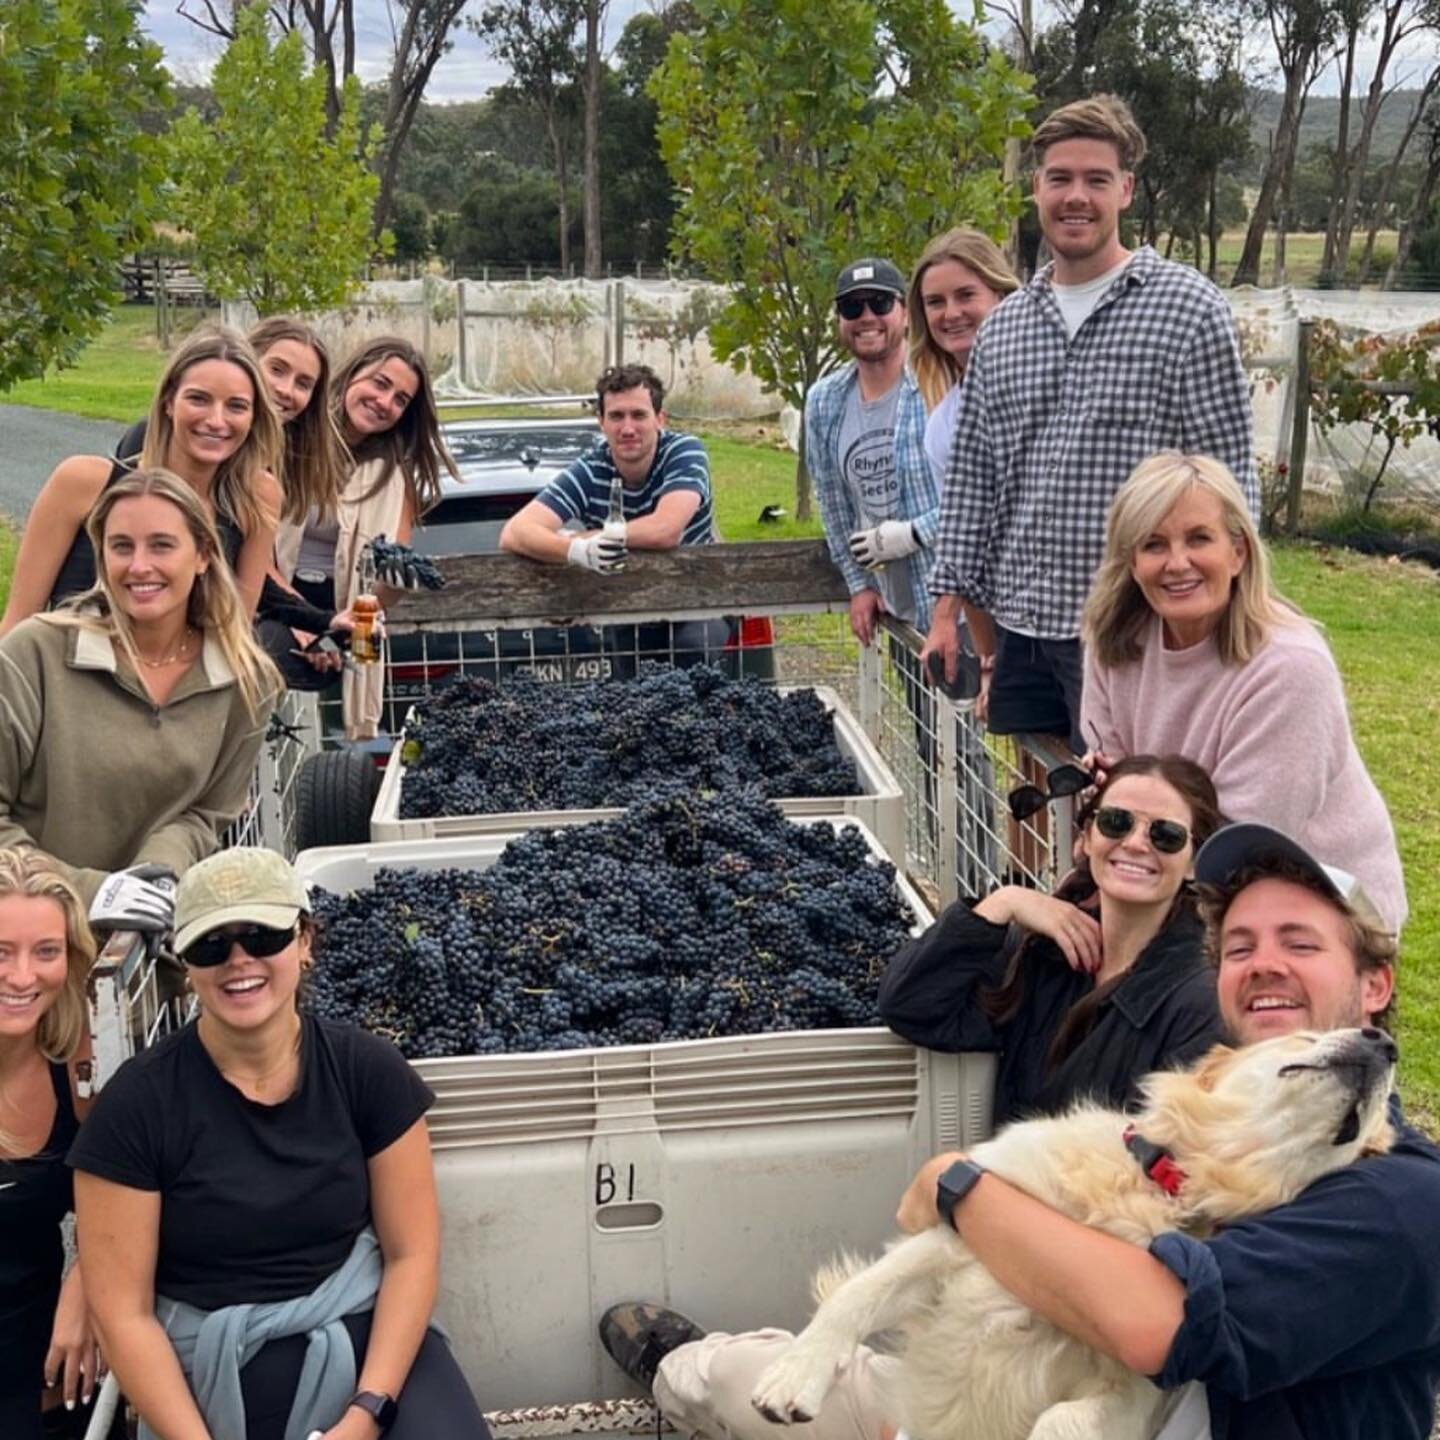 Harvest 2023 done and dusted! A bumper crop of Tempranillo &amp; Vermentino, and all hands on deck with a great crew helping us pick the grapes over recent weeks. Can&rsquo;t wait to share the fruits of our labour with you all soon! 🍇🍷🎉